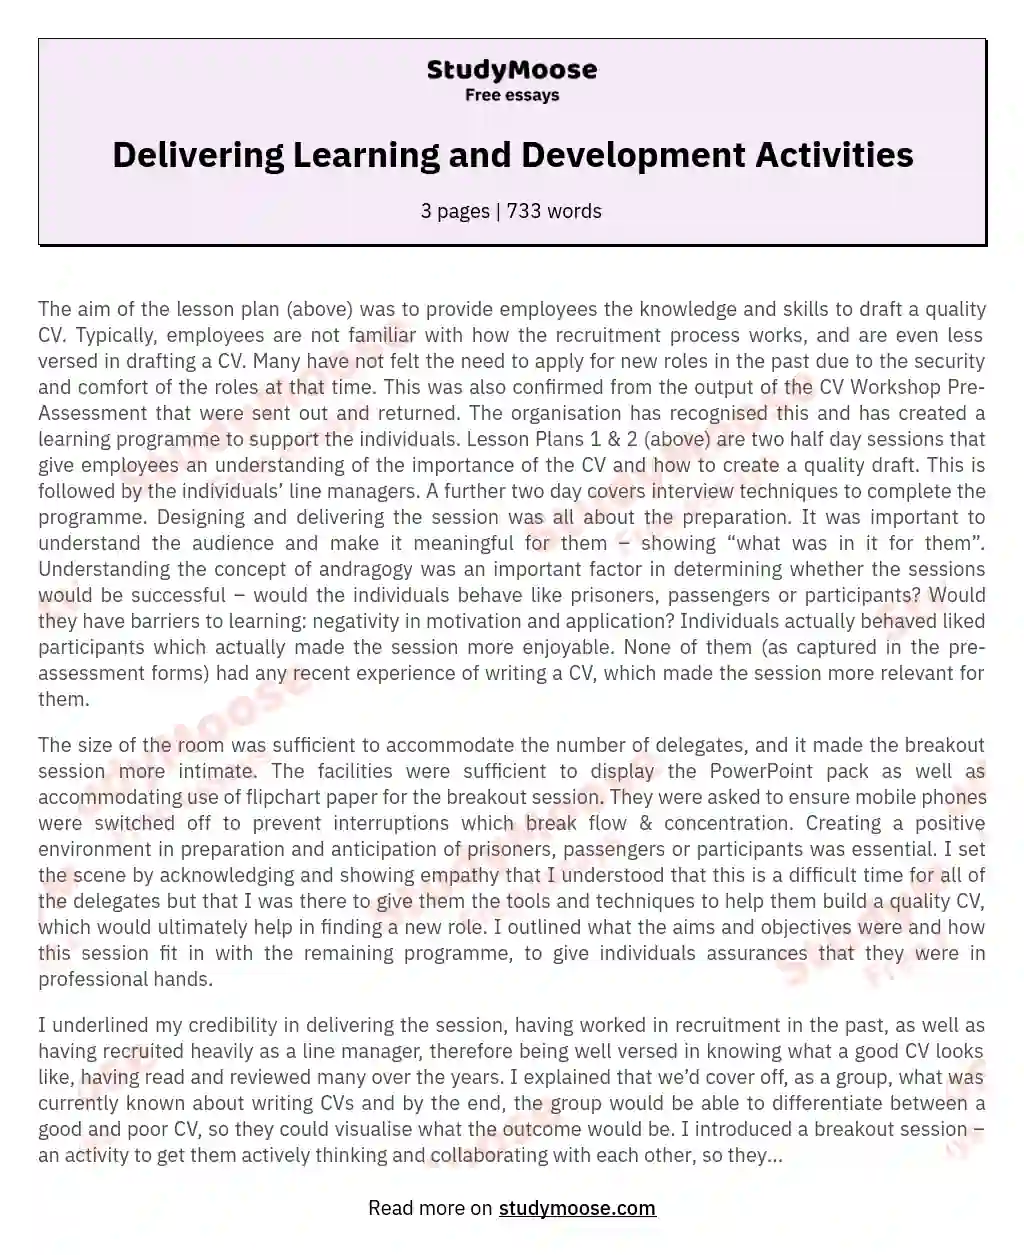 Delivering Learning and Development Activities essay